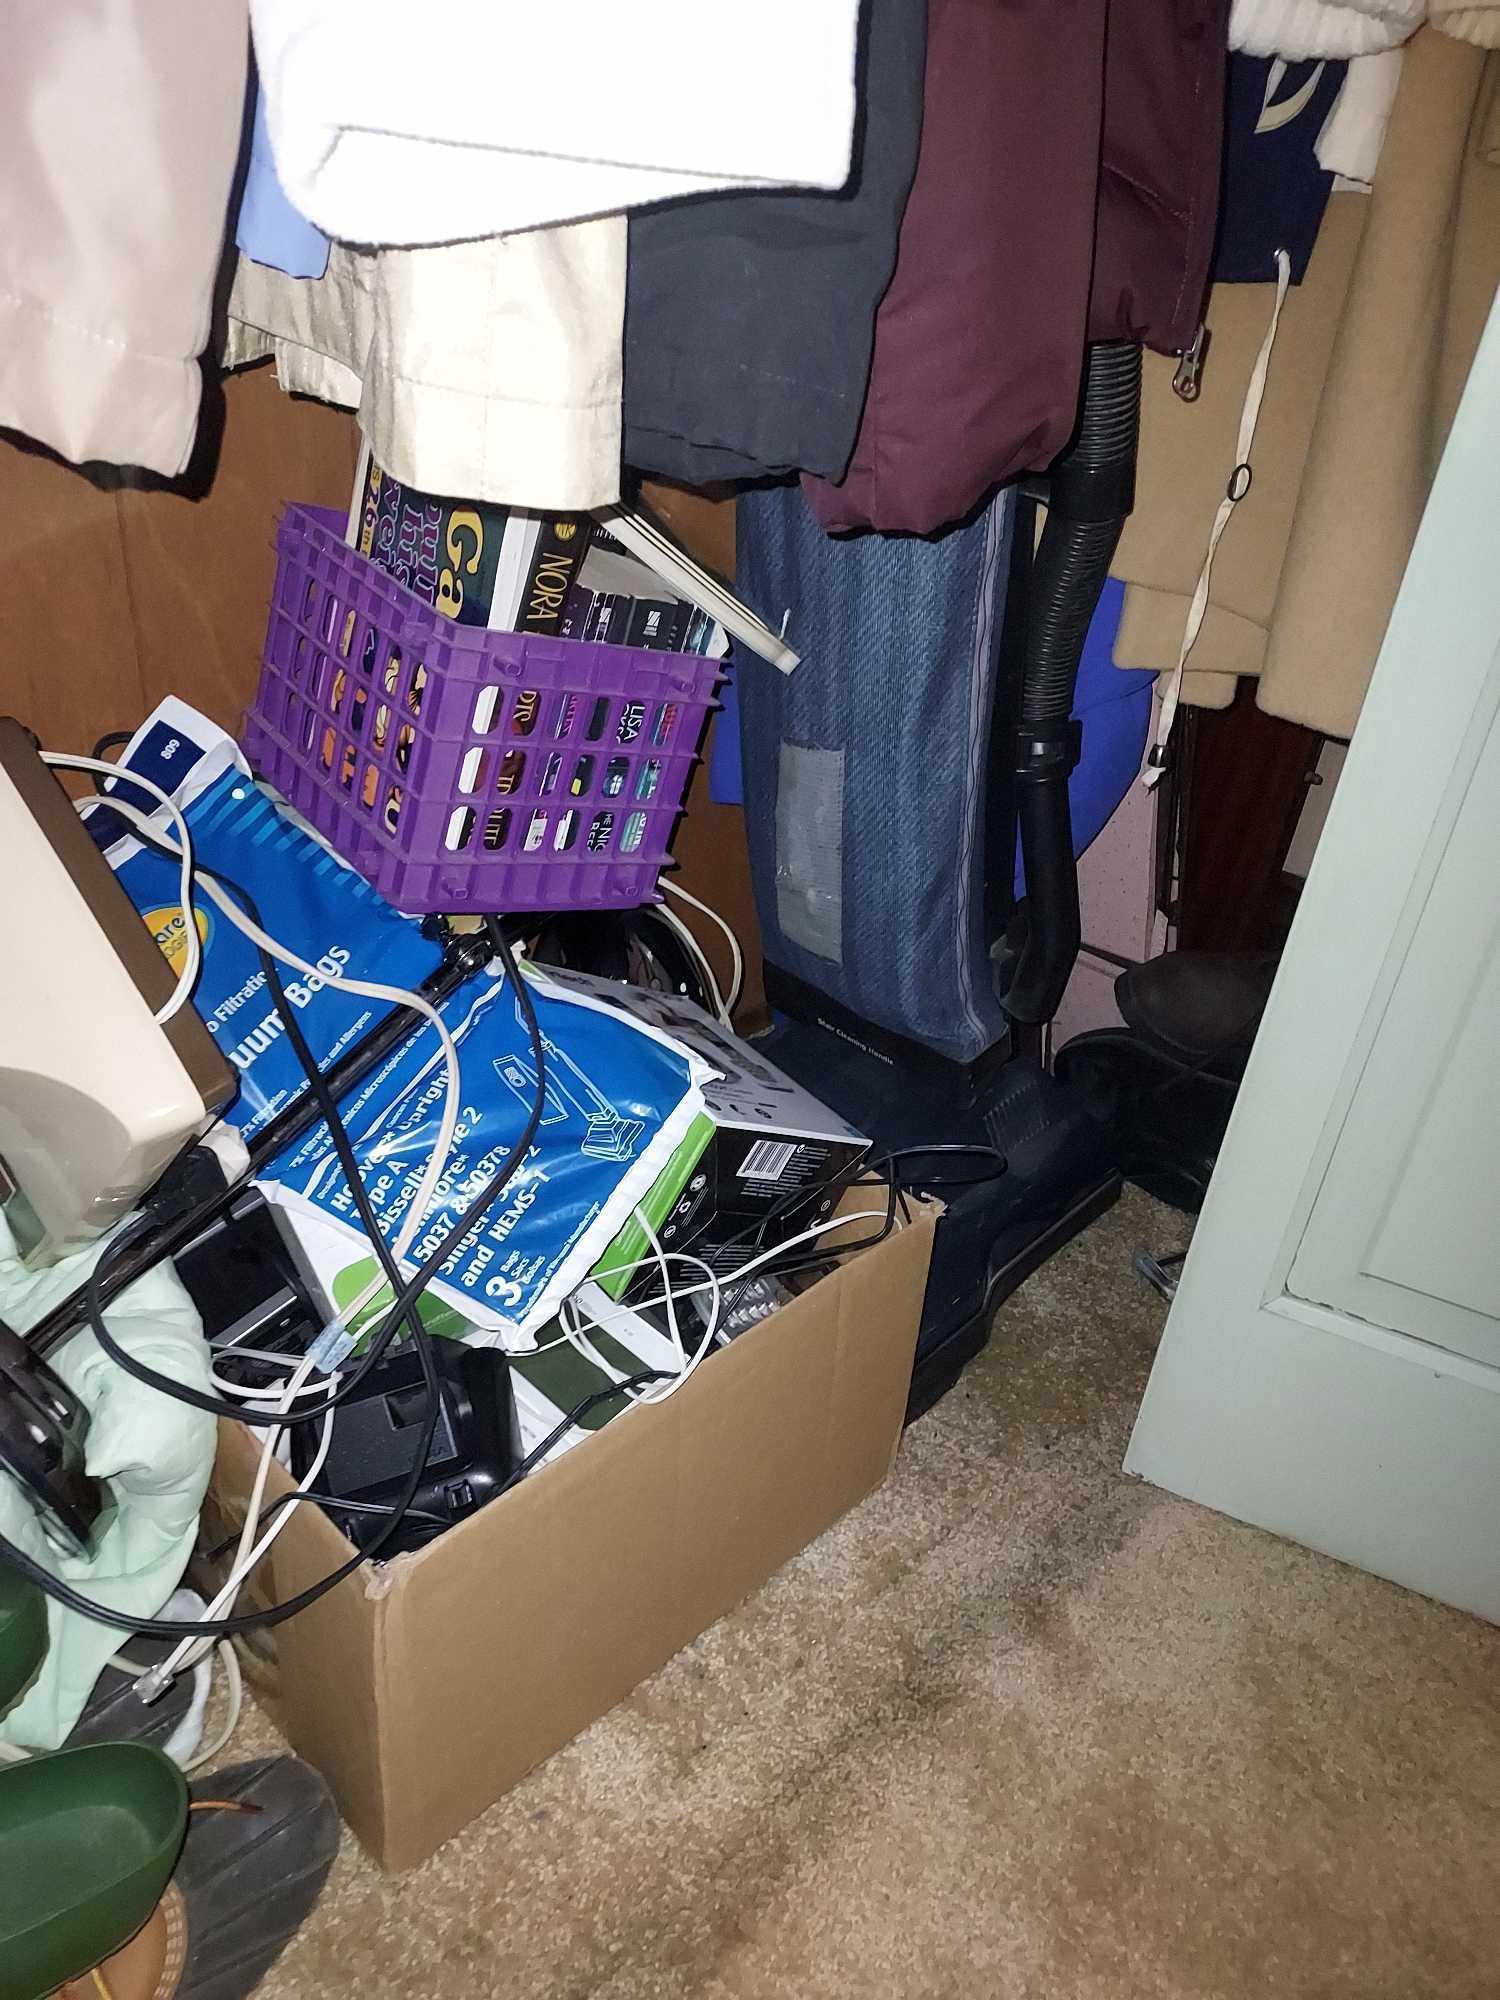 Contents of Dining Room Closet - Clothes, Electronics, Cassettes, & more